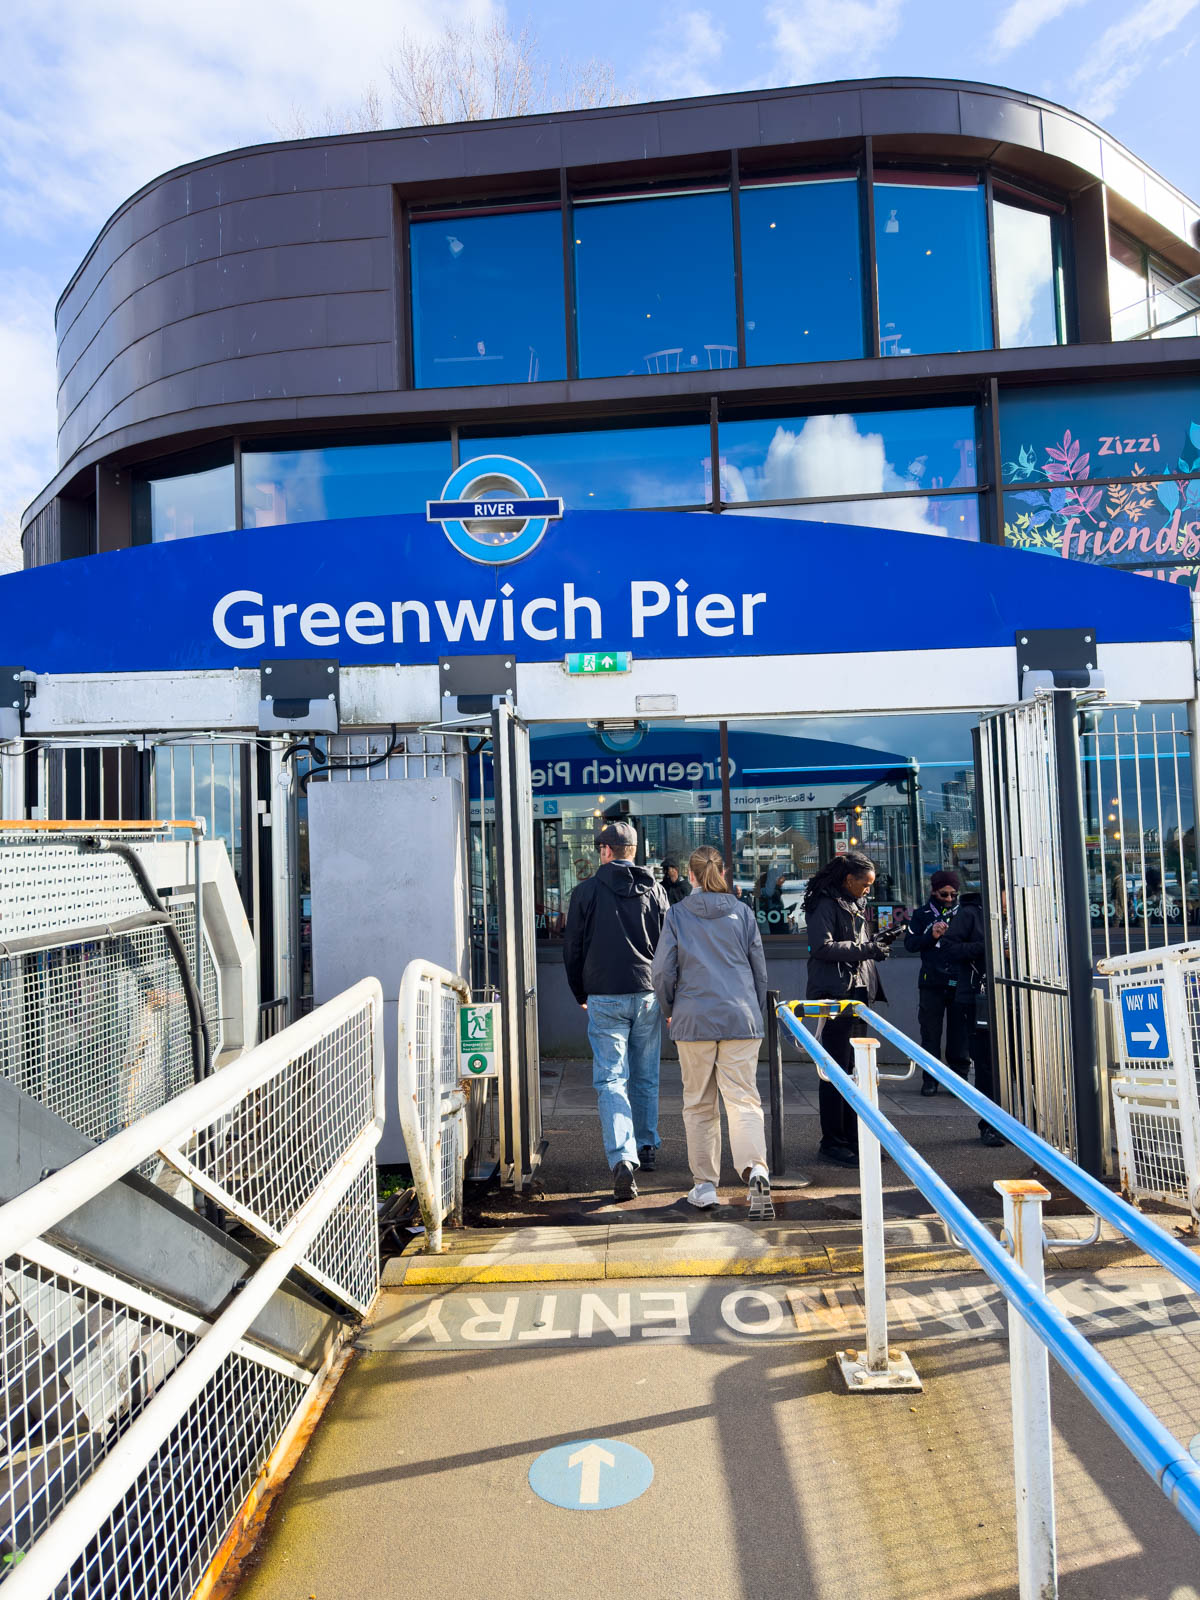 A father and daughter are walking up the pier towards the "Greenwich Pier" sign.